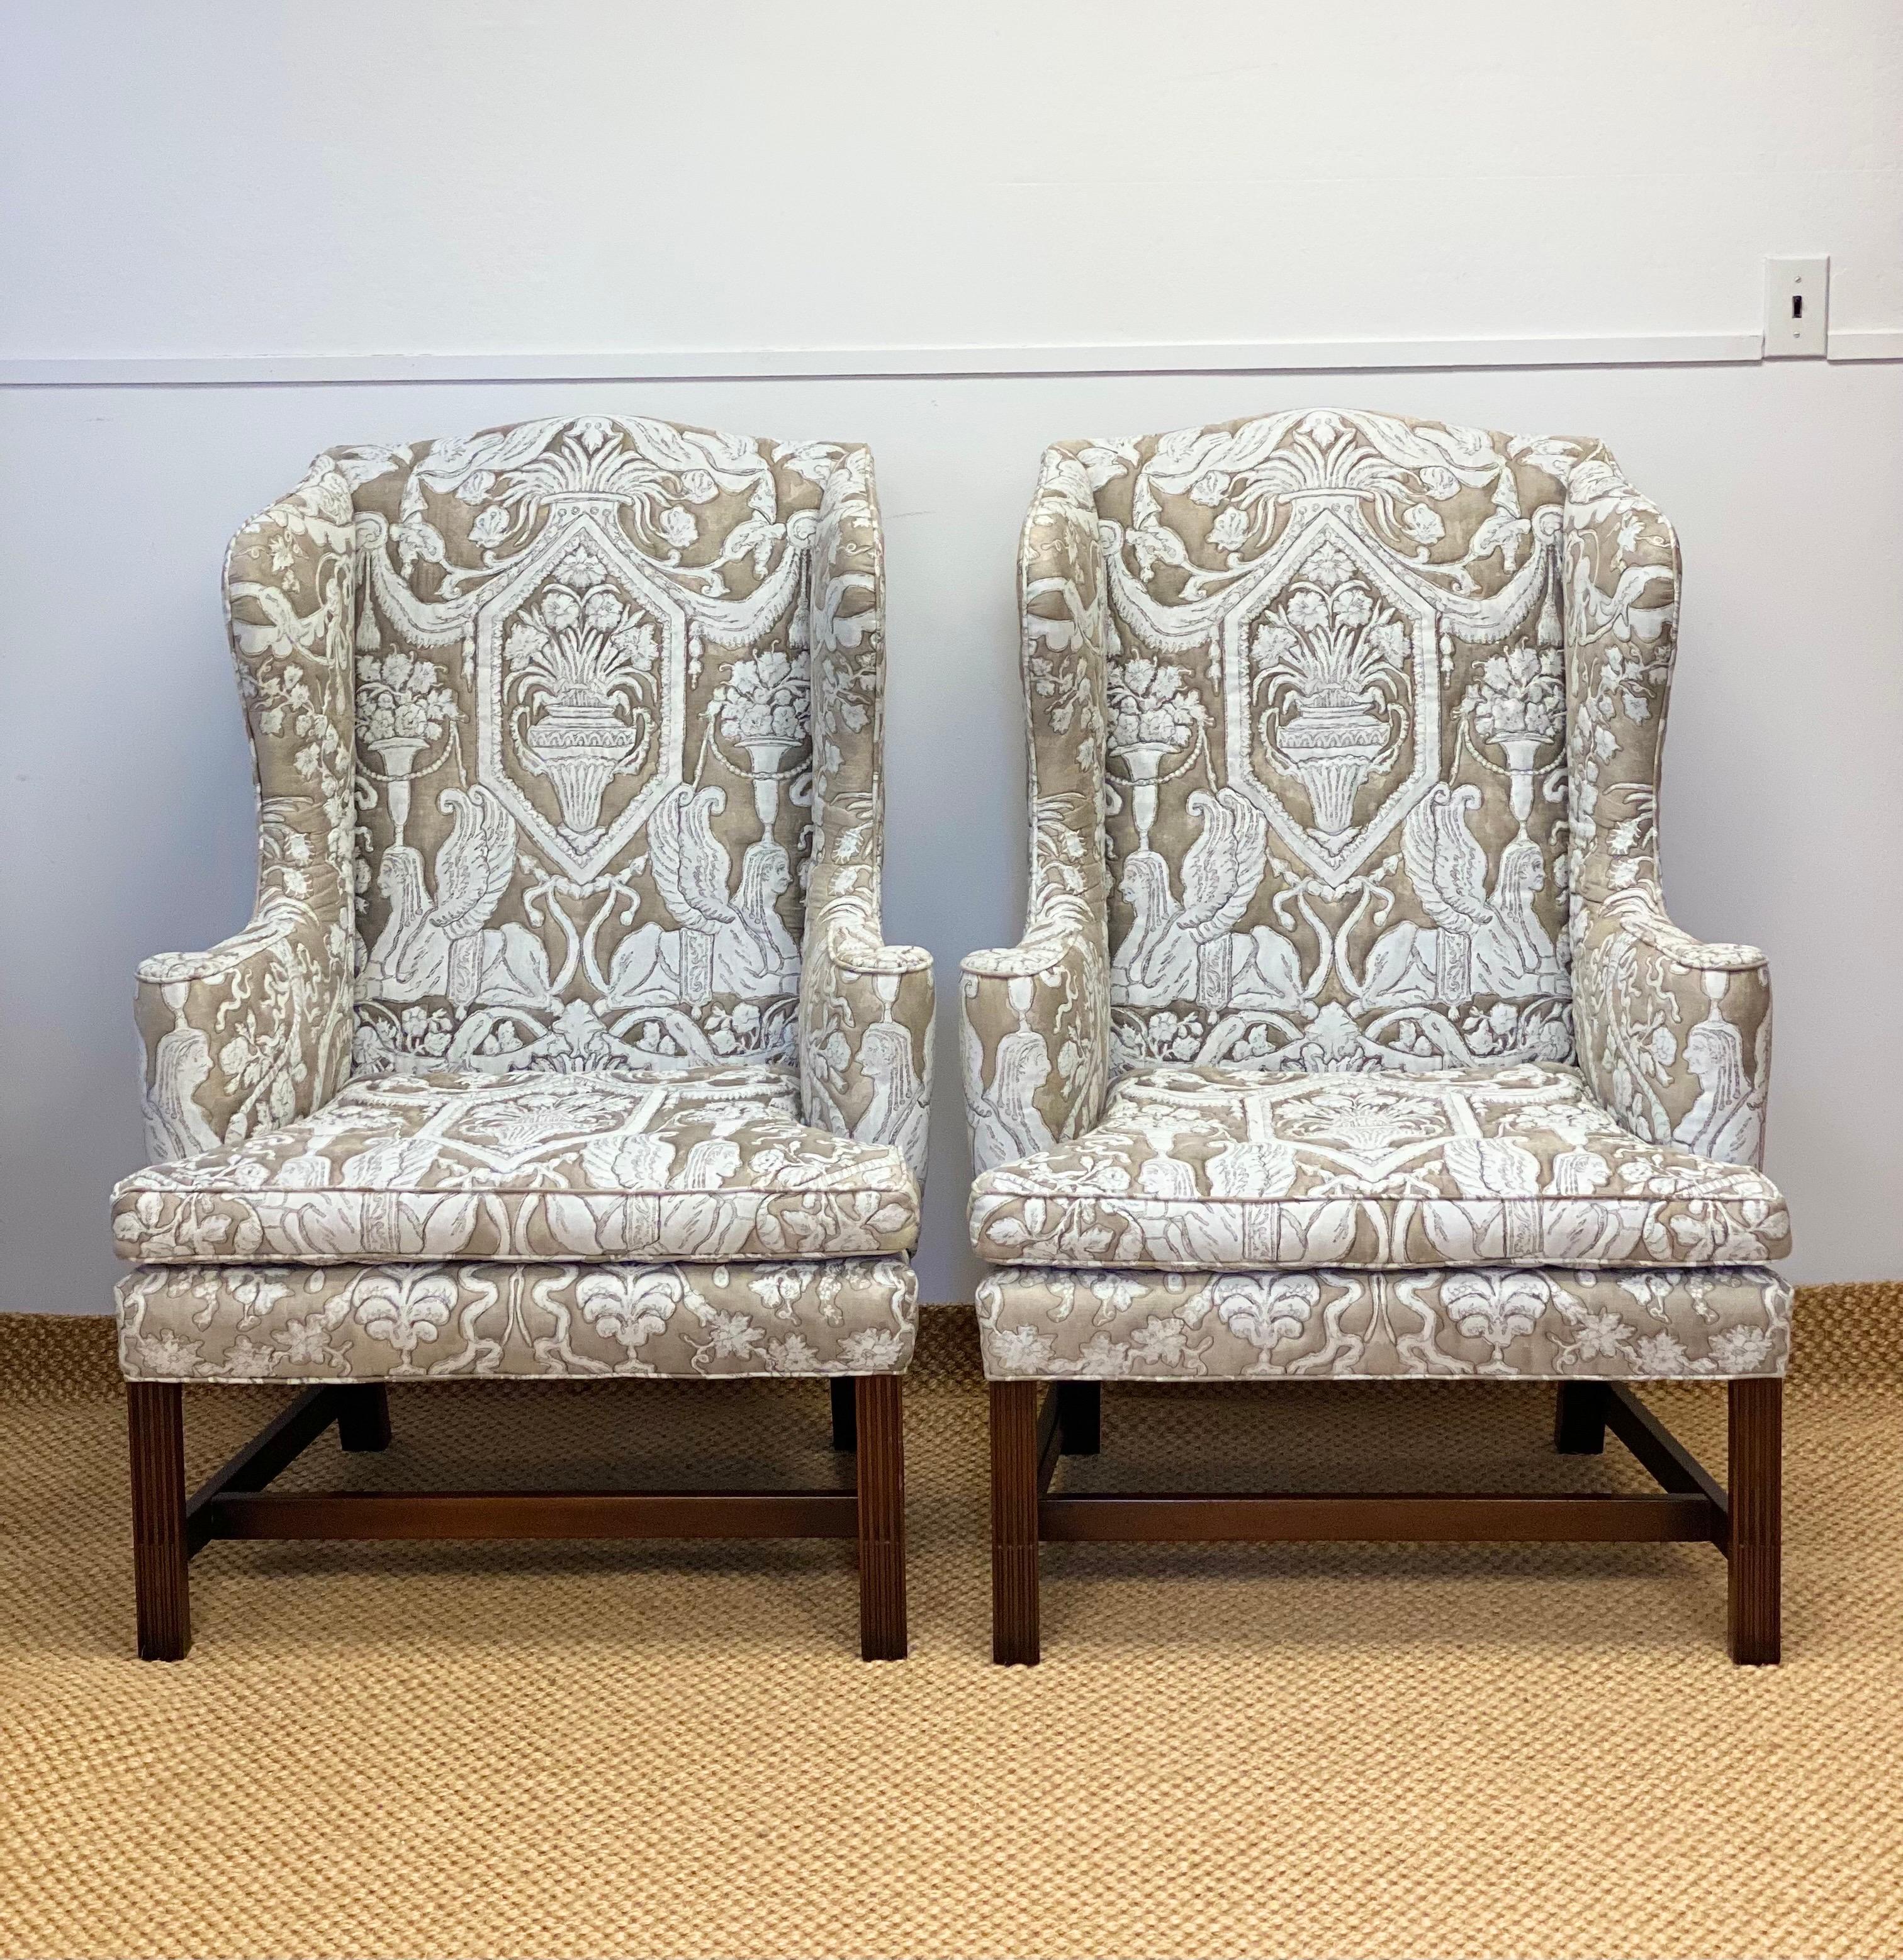 We are very pleased to offer a stunning pair of wingback chairs, by Kittinger, circa the 1960s. The Kittinger Company is an American maker of traditional colonial reproduction furniture that was founded in 1866 and is recognized for its attention to